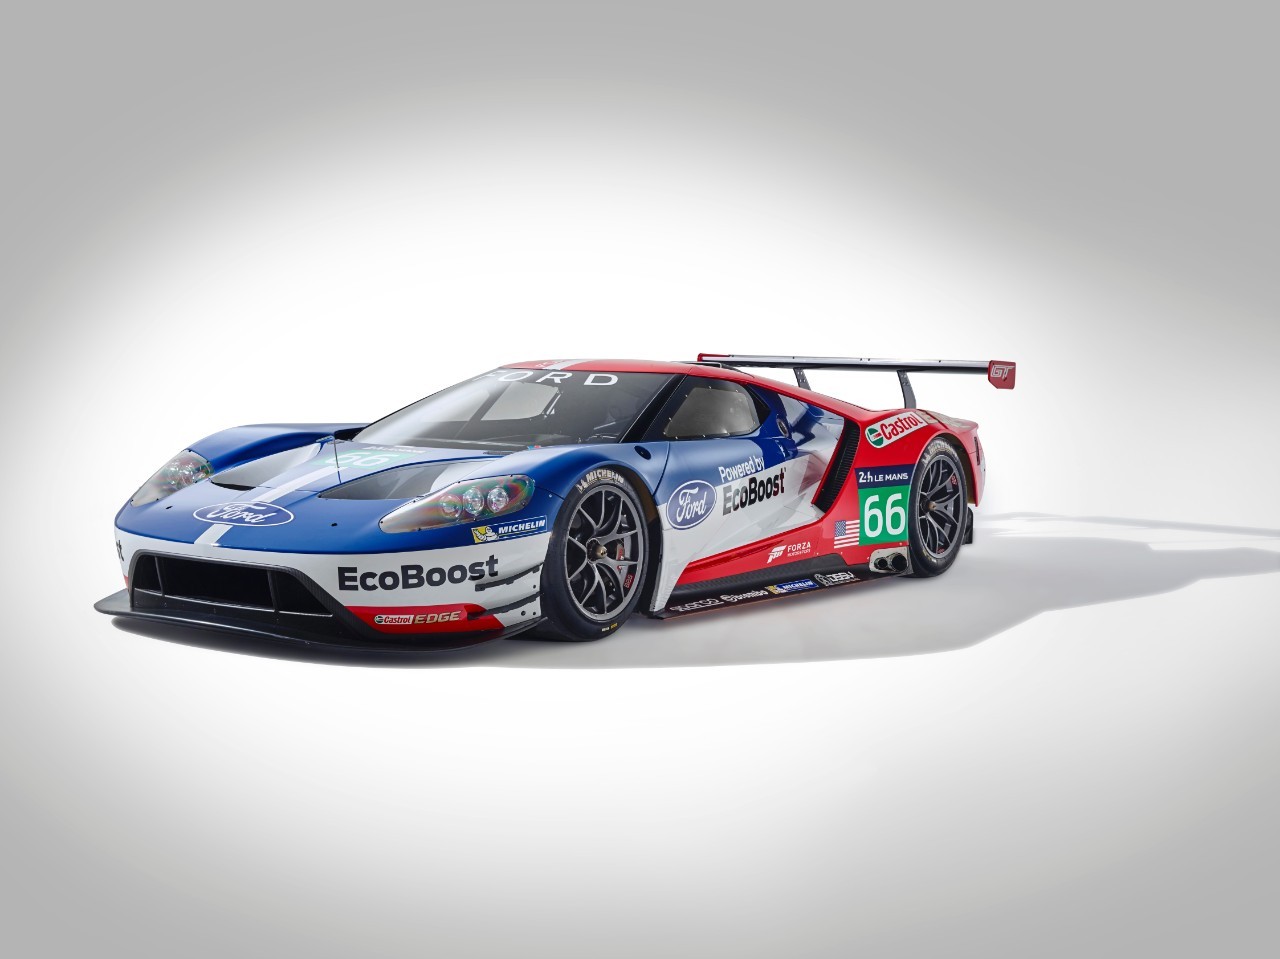 ford-gt-le-mans-racecar-confirmed-to-debut-at-the-2016-rolex-24-at-daytona-video-photo-gallery_11.jpg